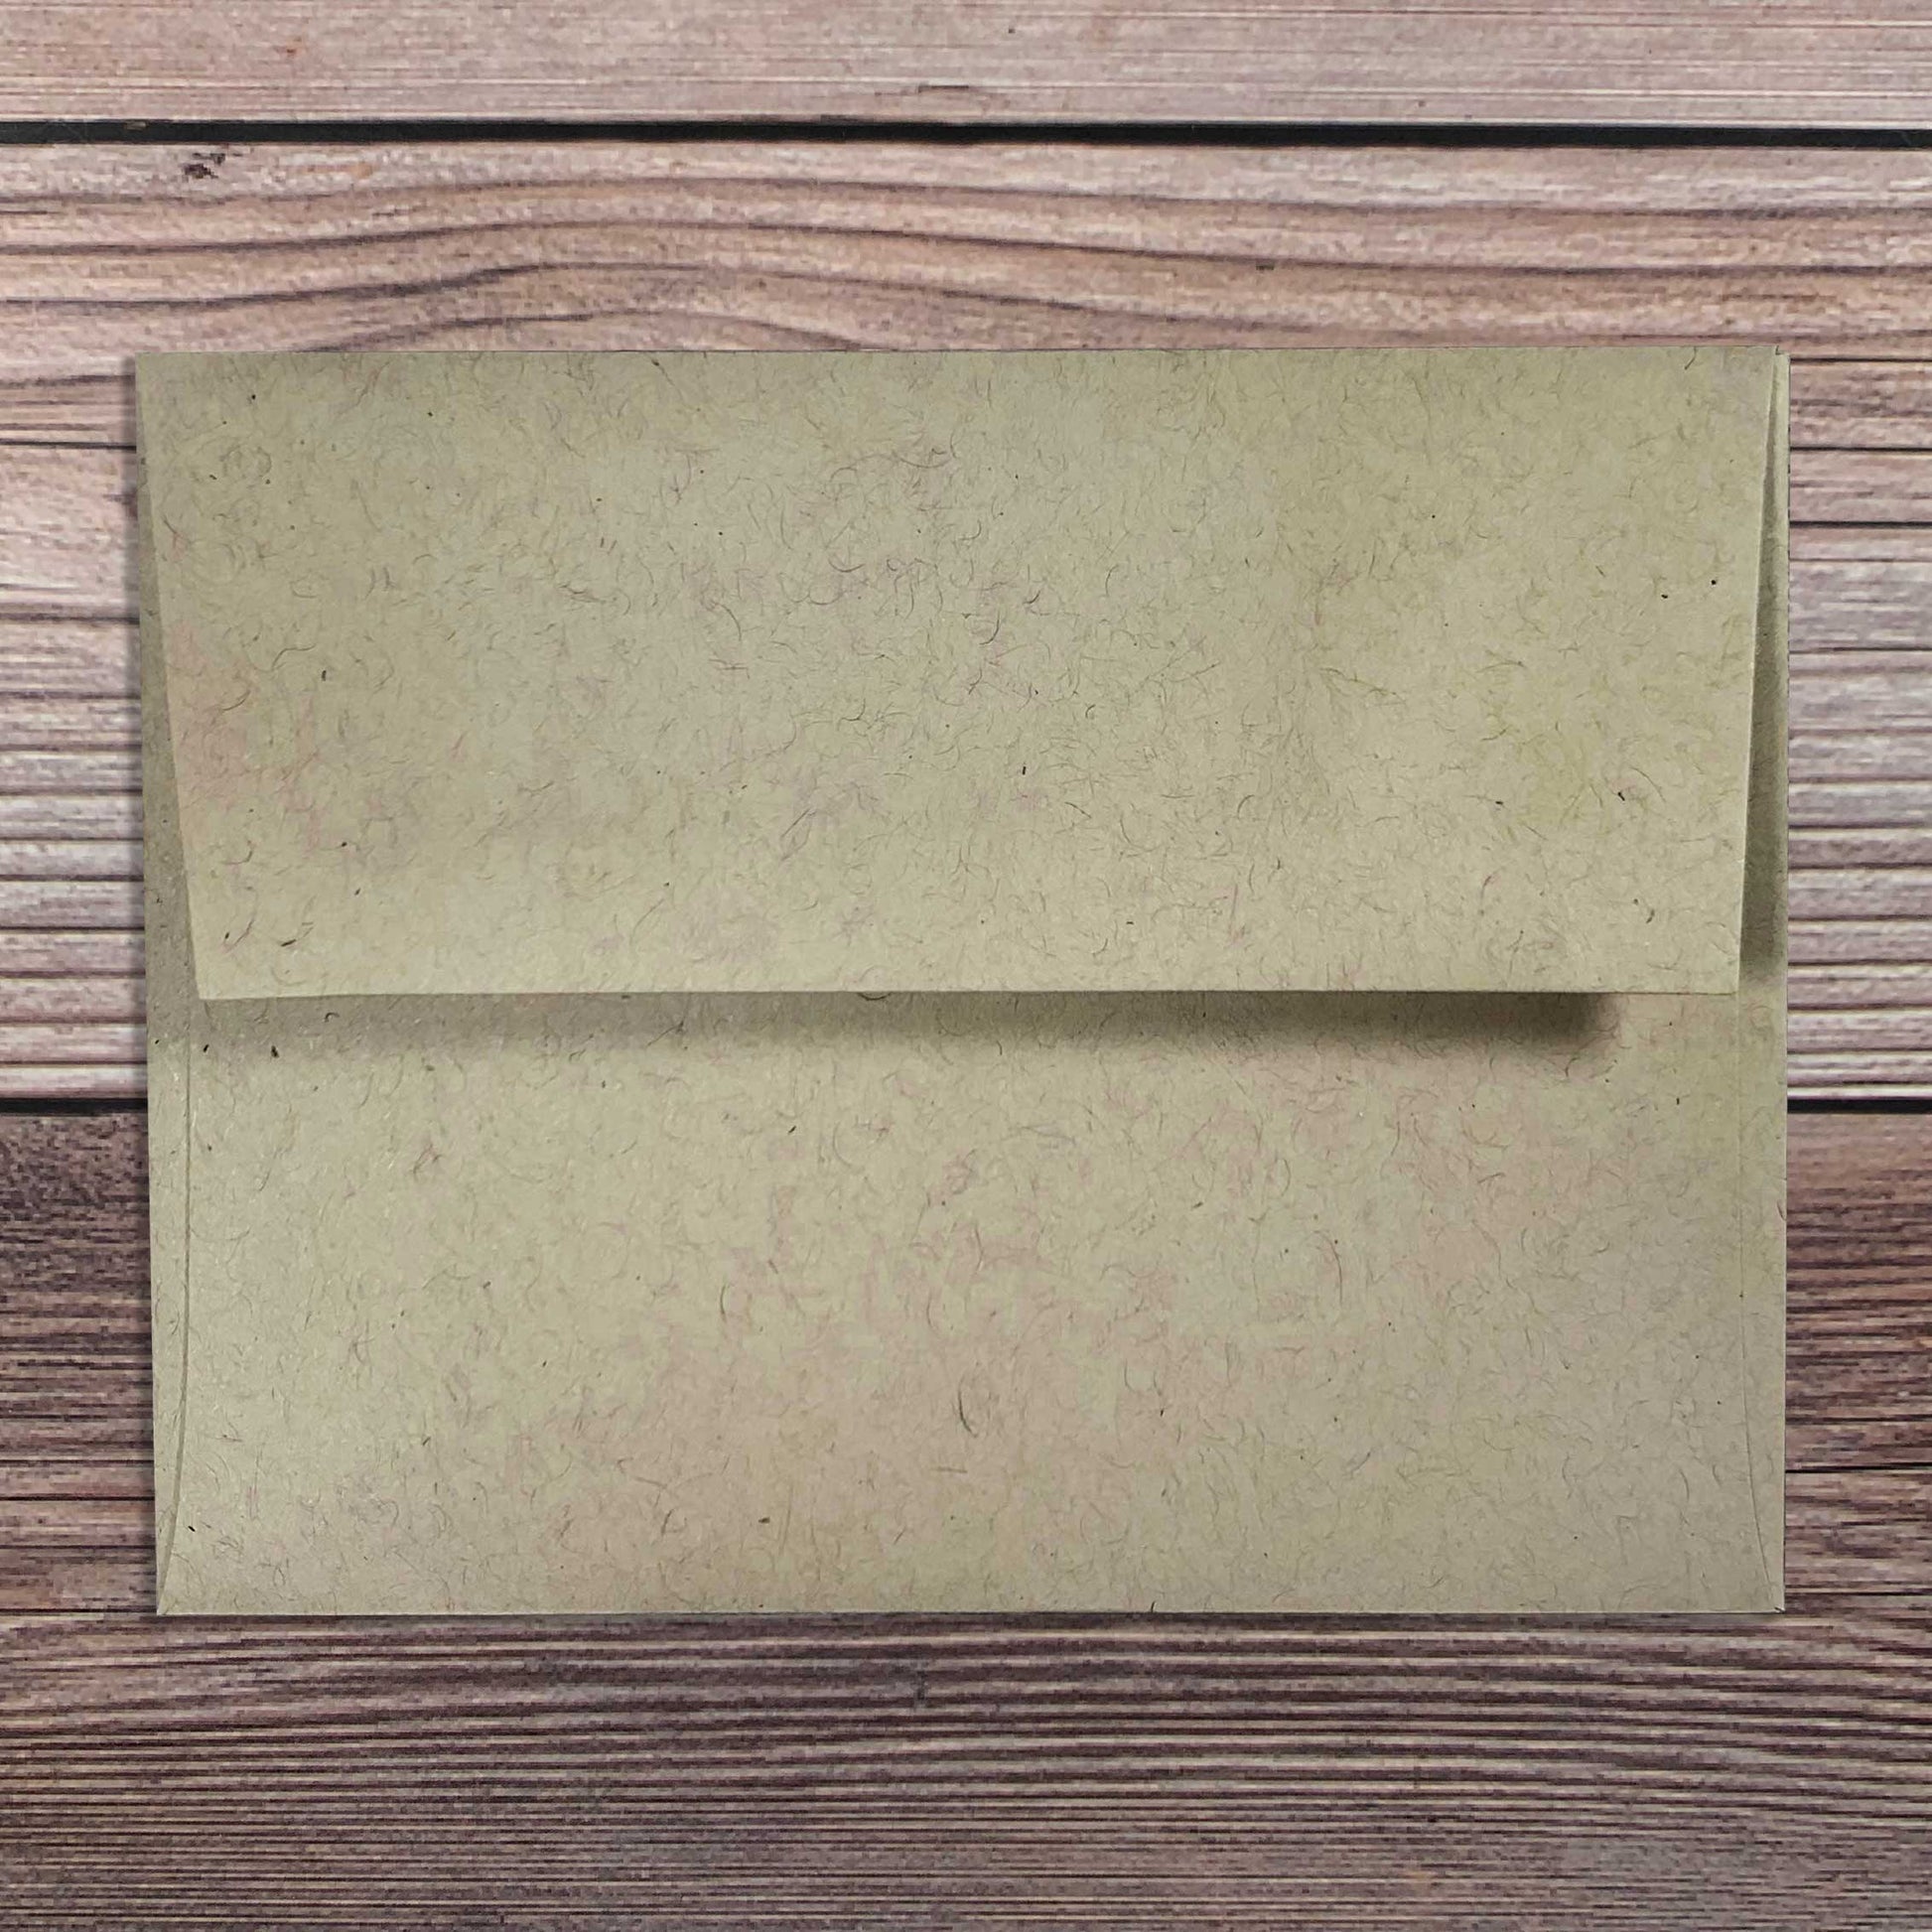 Greeting Card envelope, kraft color, square flap, included with letterpress Father's Day greeting card.